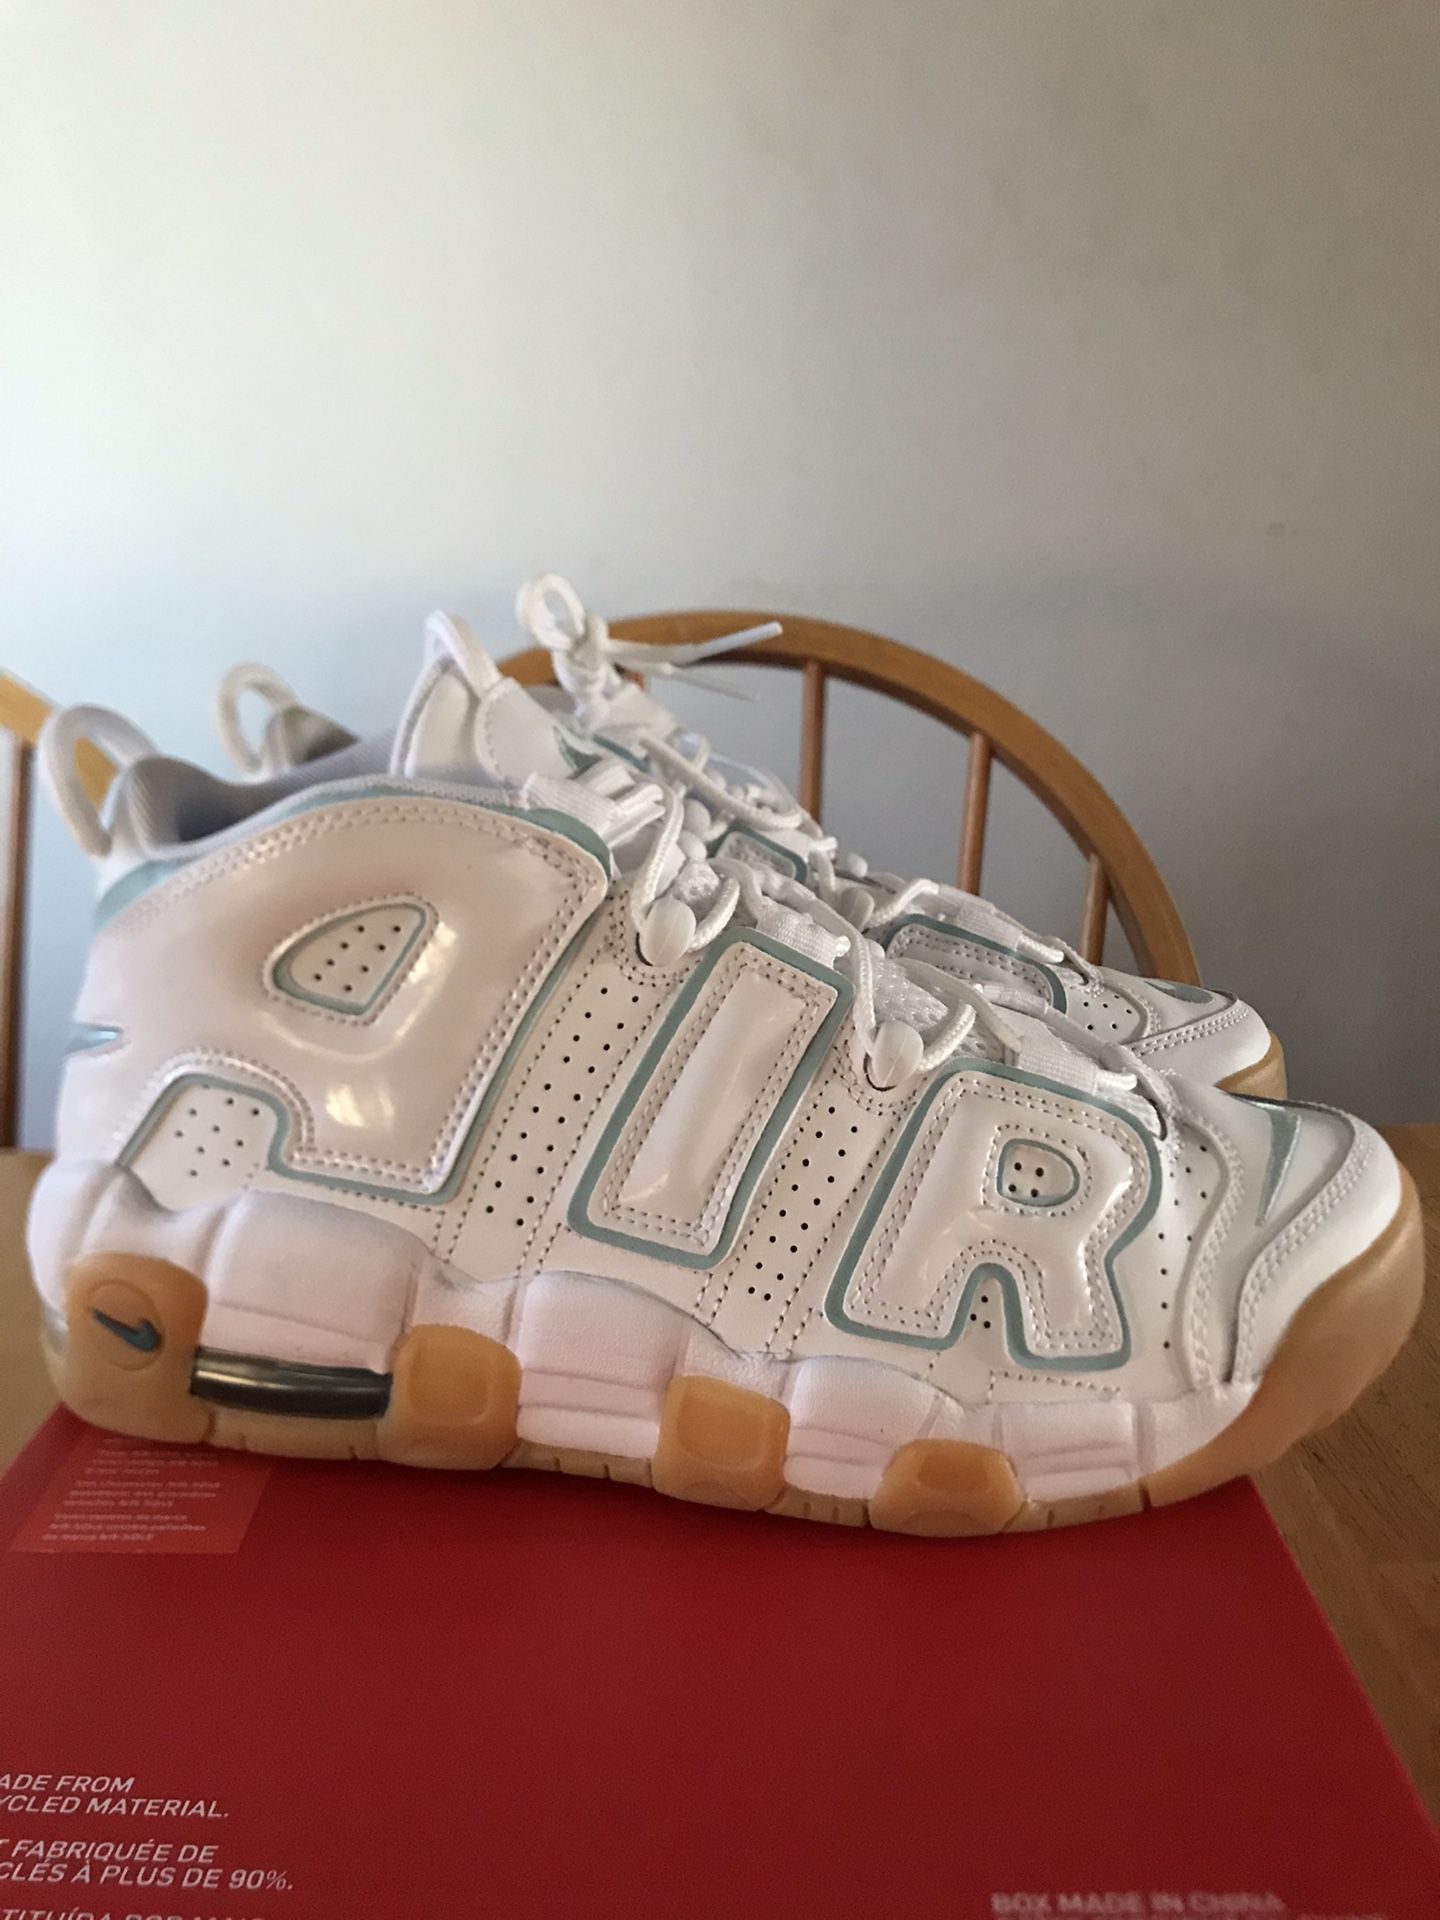 Brand new Nike air more uptempo Ocean bliss basketball shoes youth 7y, men’s 7, women’s 8.5